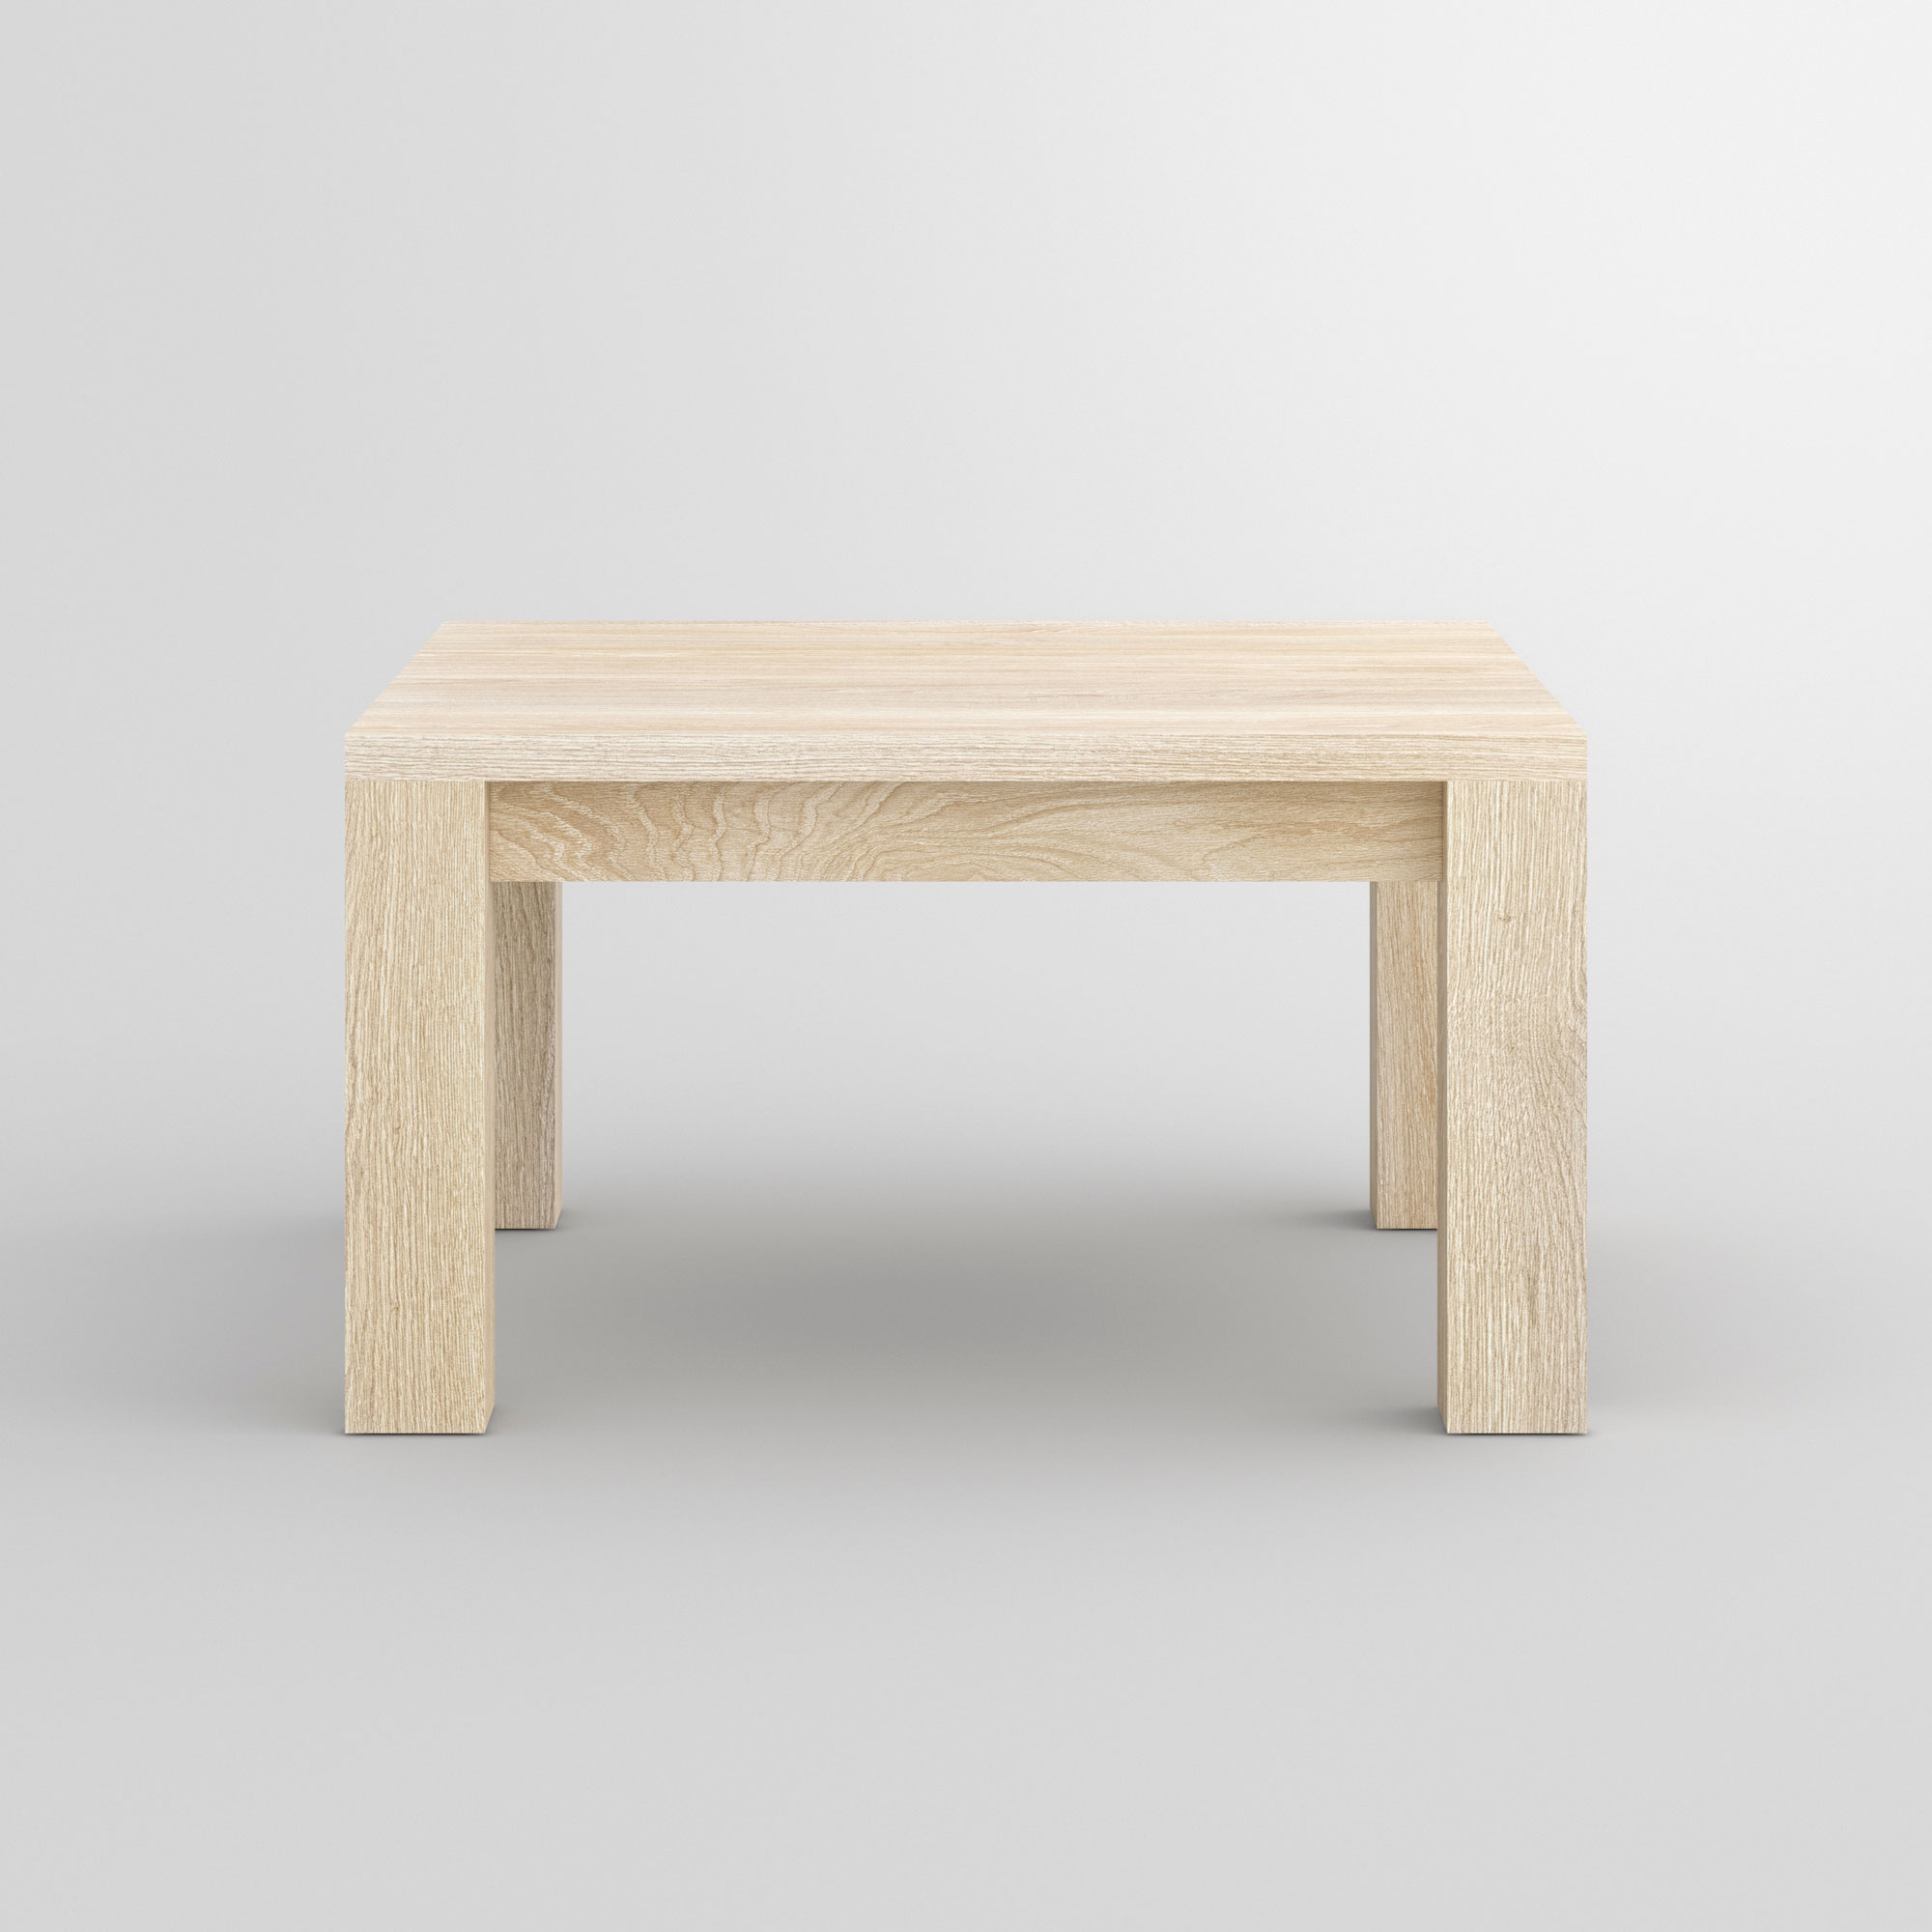 Coffee Table in Oak CUBUS cam2 custom made in solid wood by vitamin design